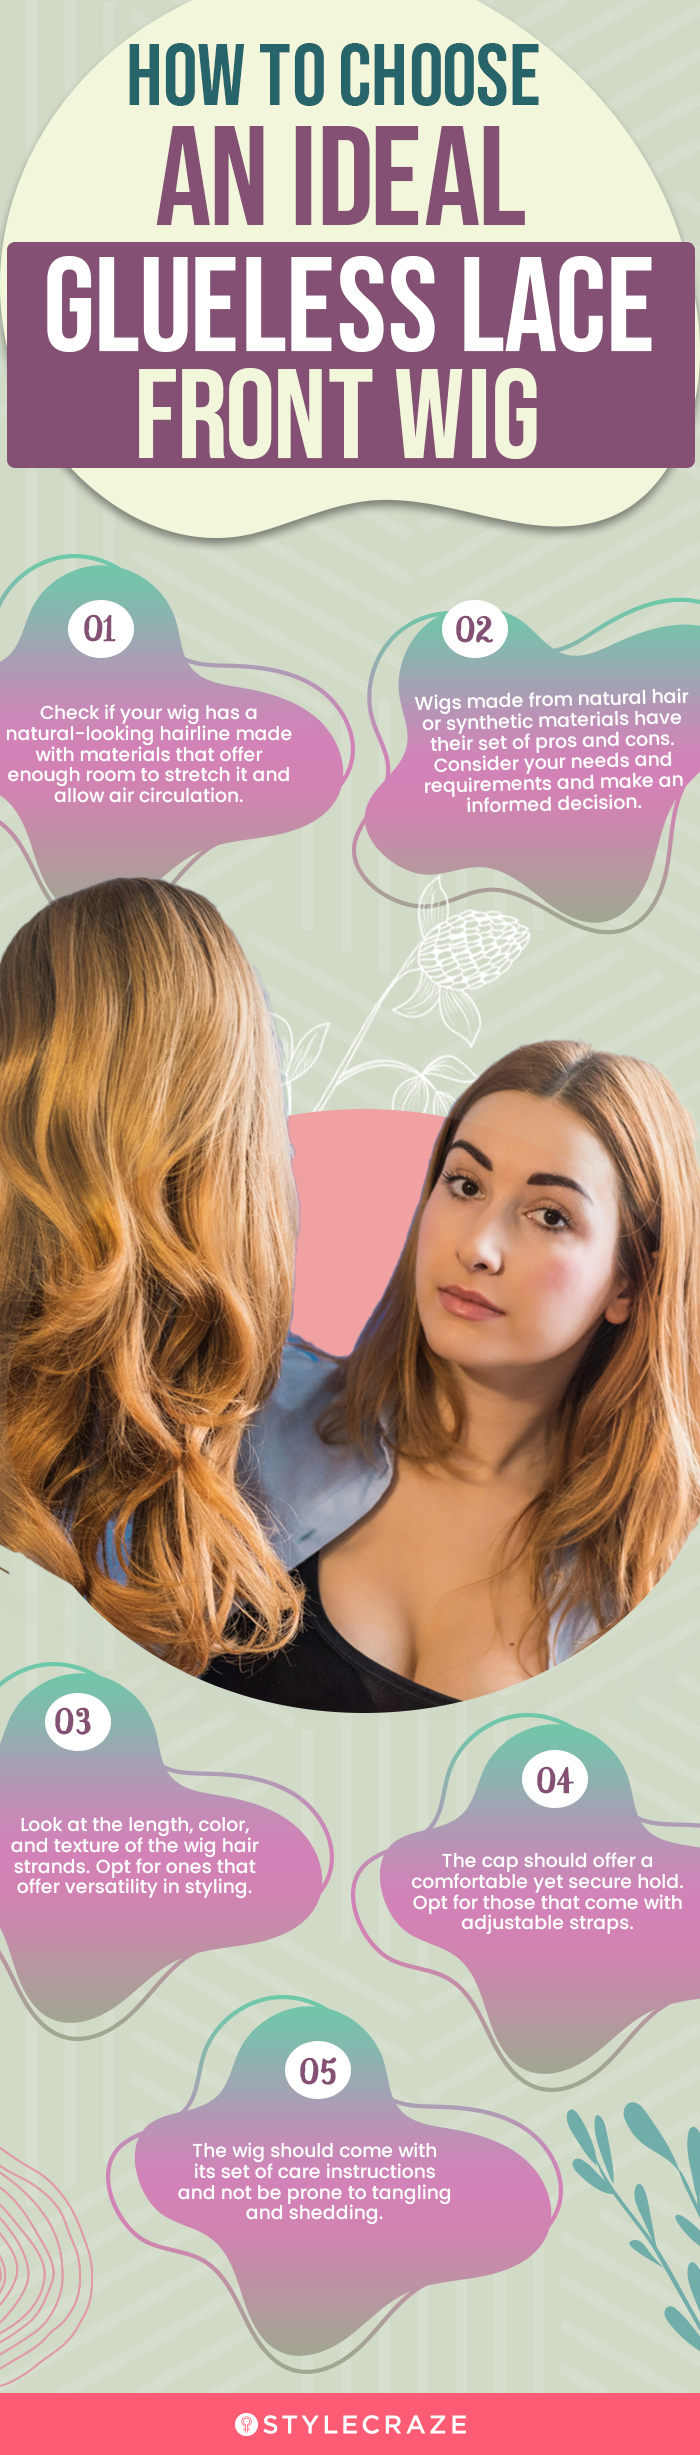 How To Choose An Ideal Glueless Lace Front Wig (infographic)